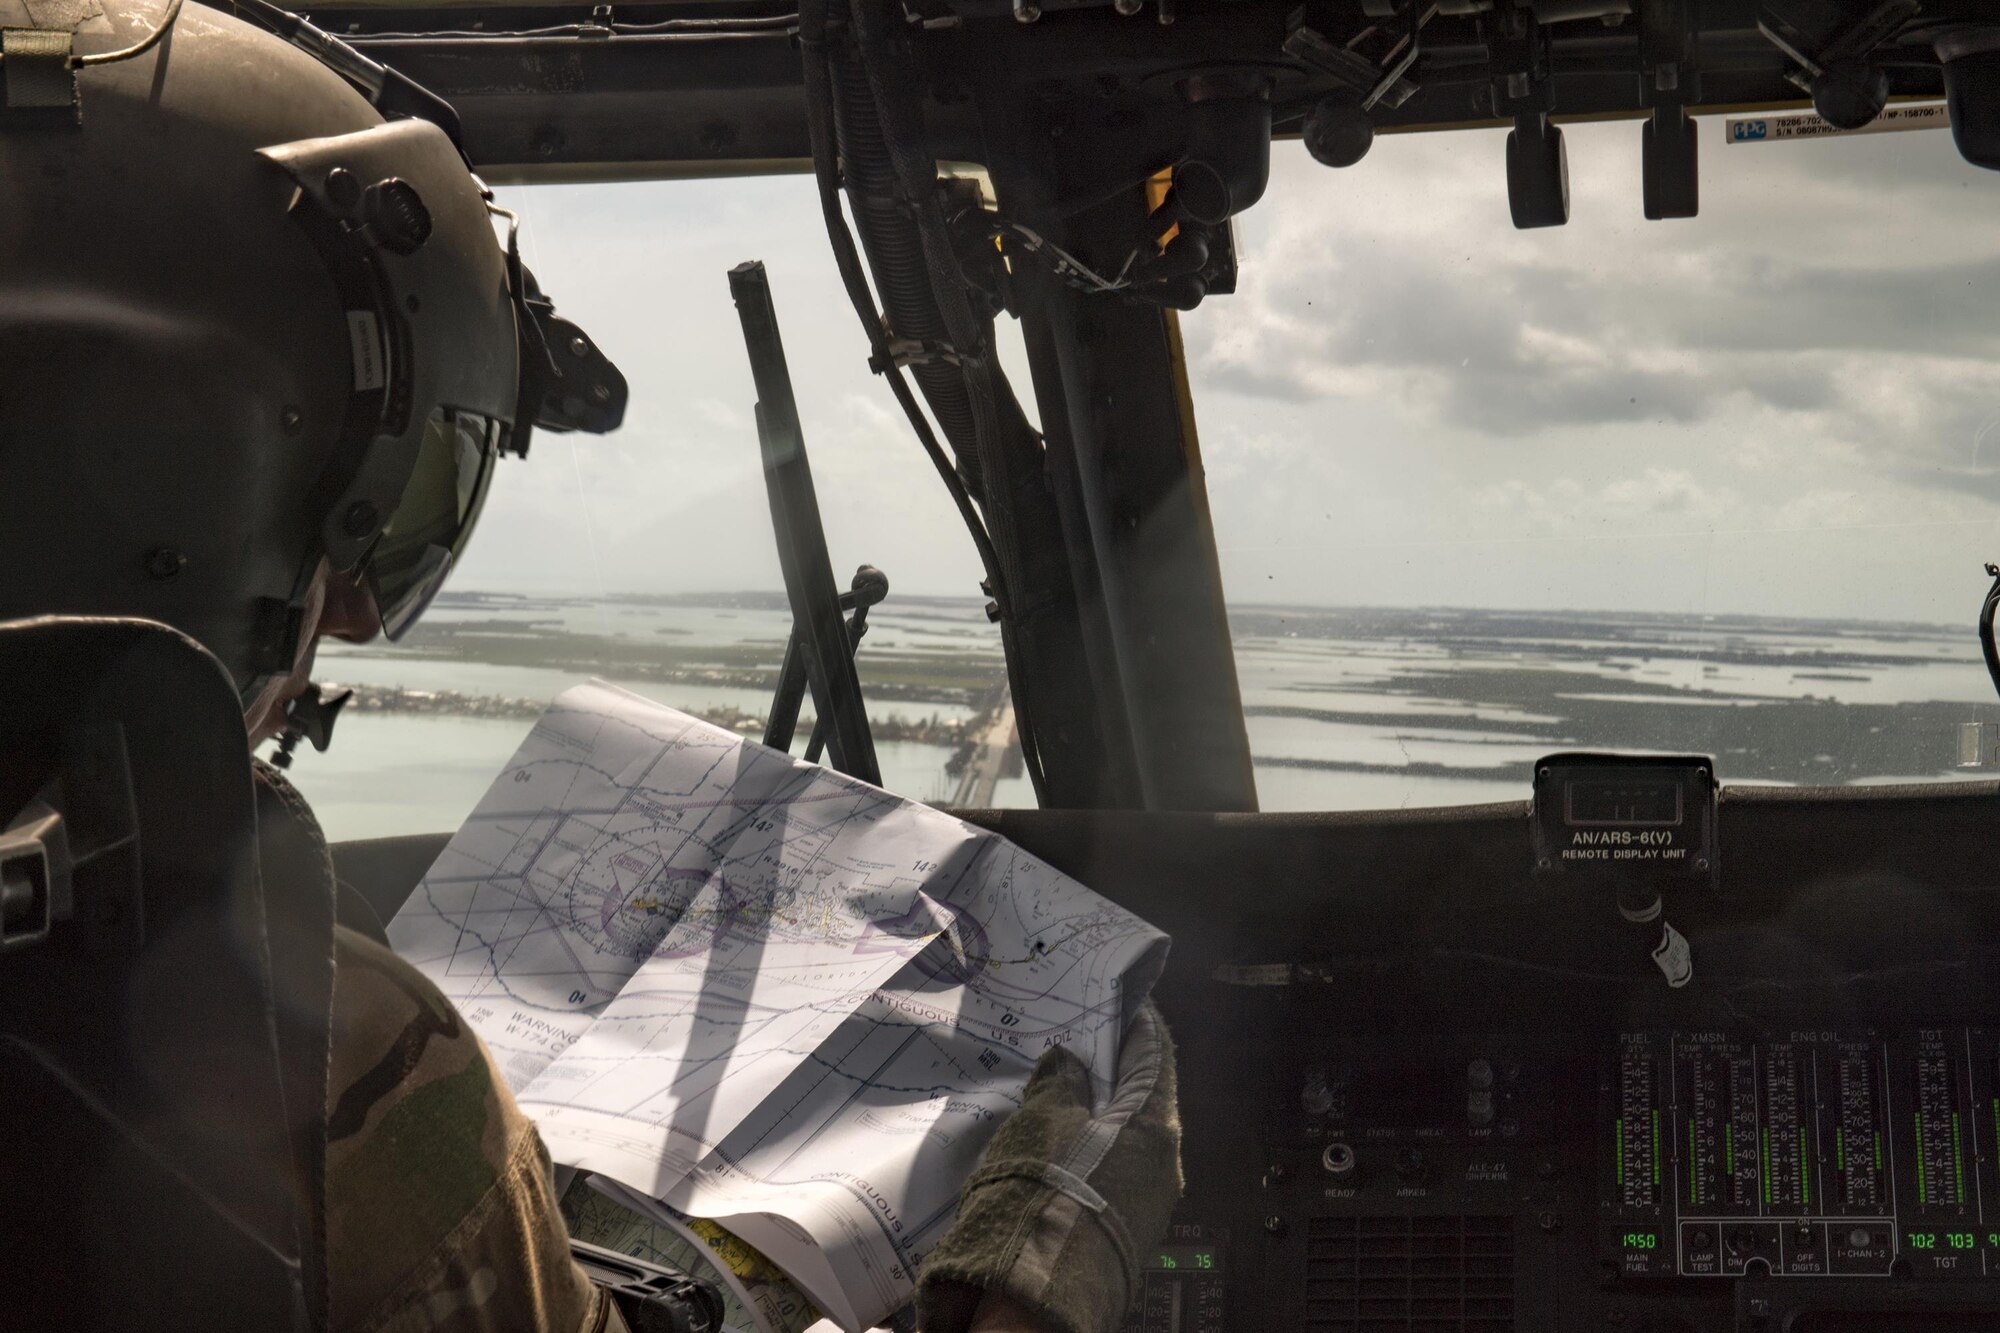 Capt. Nicholas Santoro, 66th Rescue Squadron HH-60G Pave Hawk pilot, checks an airspace map while flying over South Florida, Sept. 12, 2017. The 563d Rescue Group prepositioned aircraft and personnel in support of FEMA and U.S. Northern Command for rescue operations after Hurricane Irma made landfall in Florida. (U.S. Air Force photo by Staff Sgt. Ryan Callaghan)